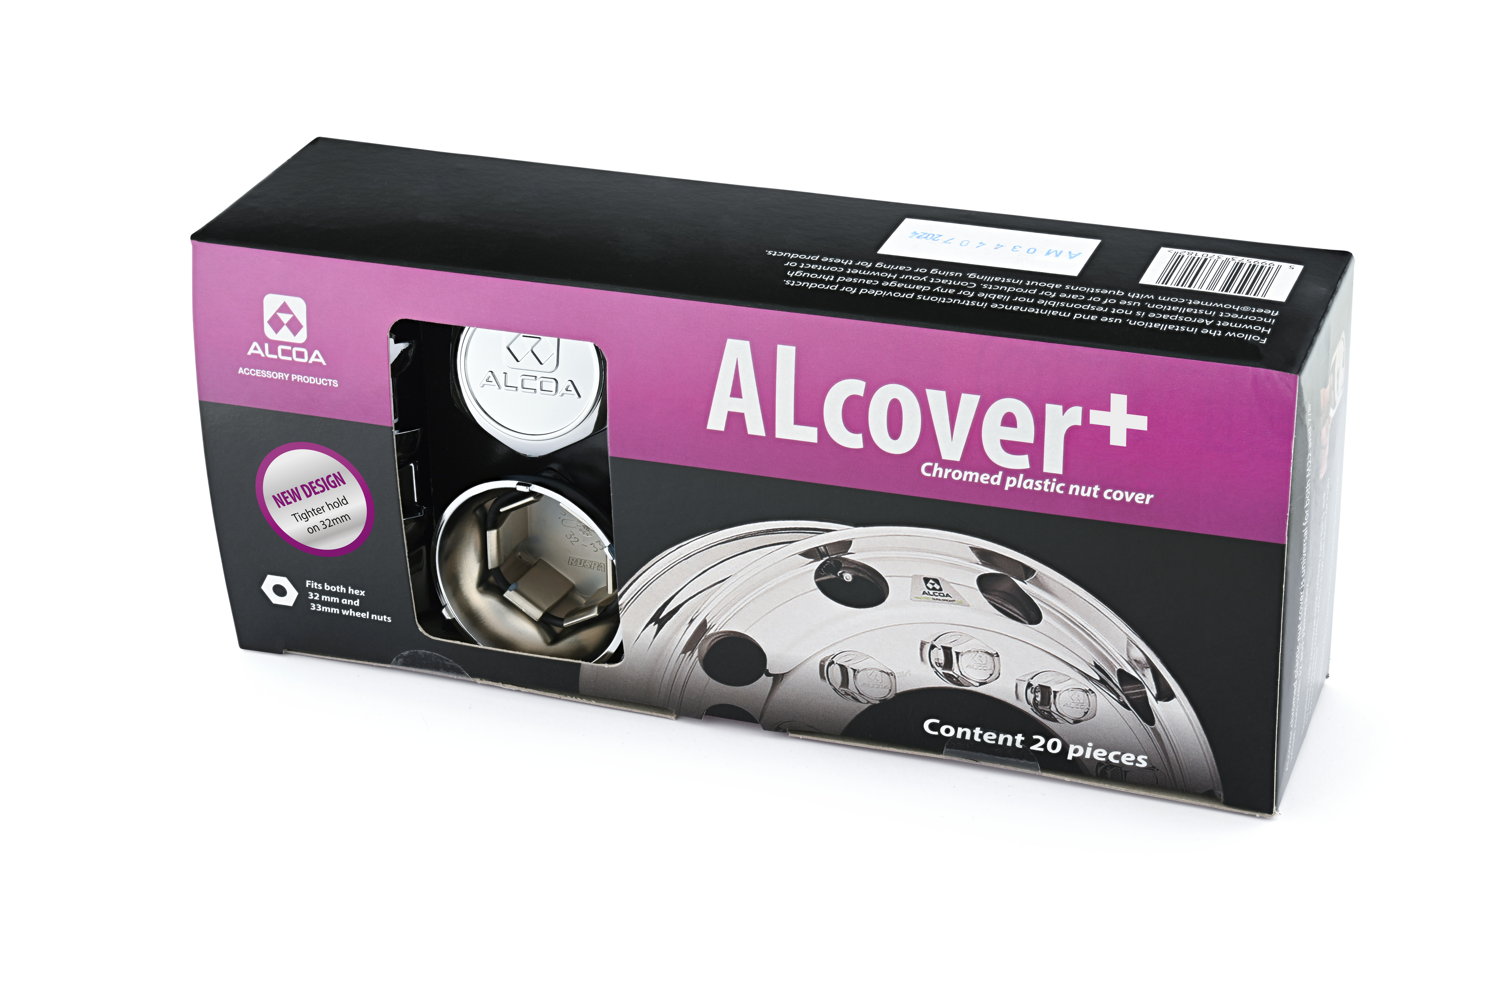 Alcover+_box_front